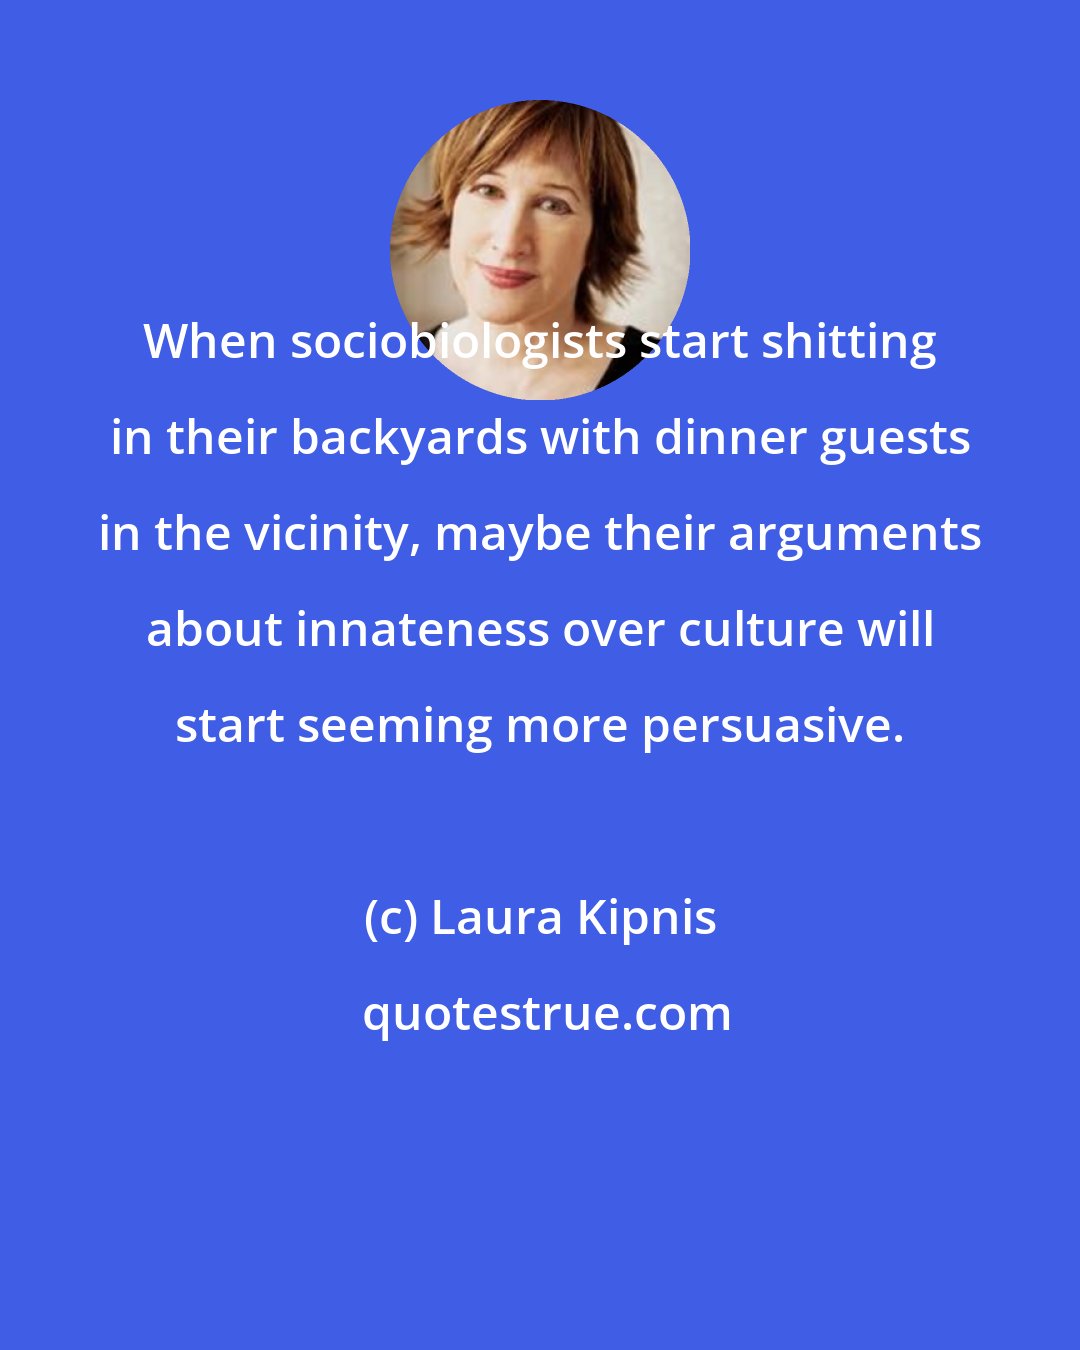 Laura Kipnis: When sociobiologists start shitting in their backyards with dinner guests in the vicinity, maybe their arguments about innateness over culture will start seeming more persuasive.